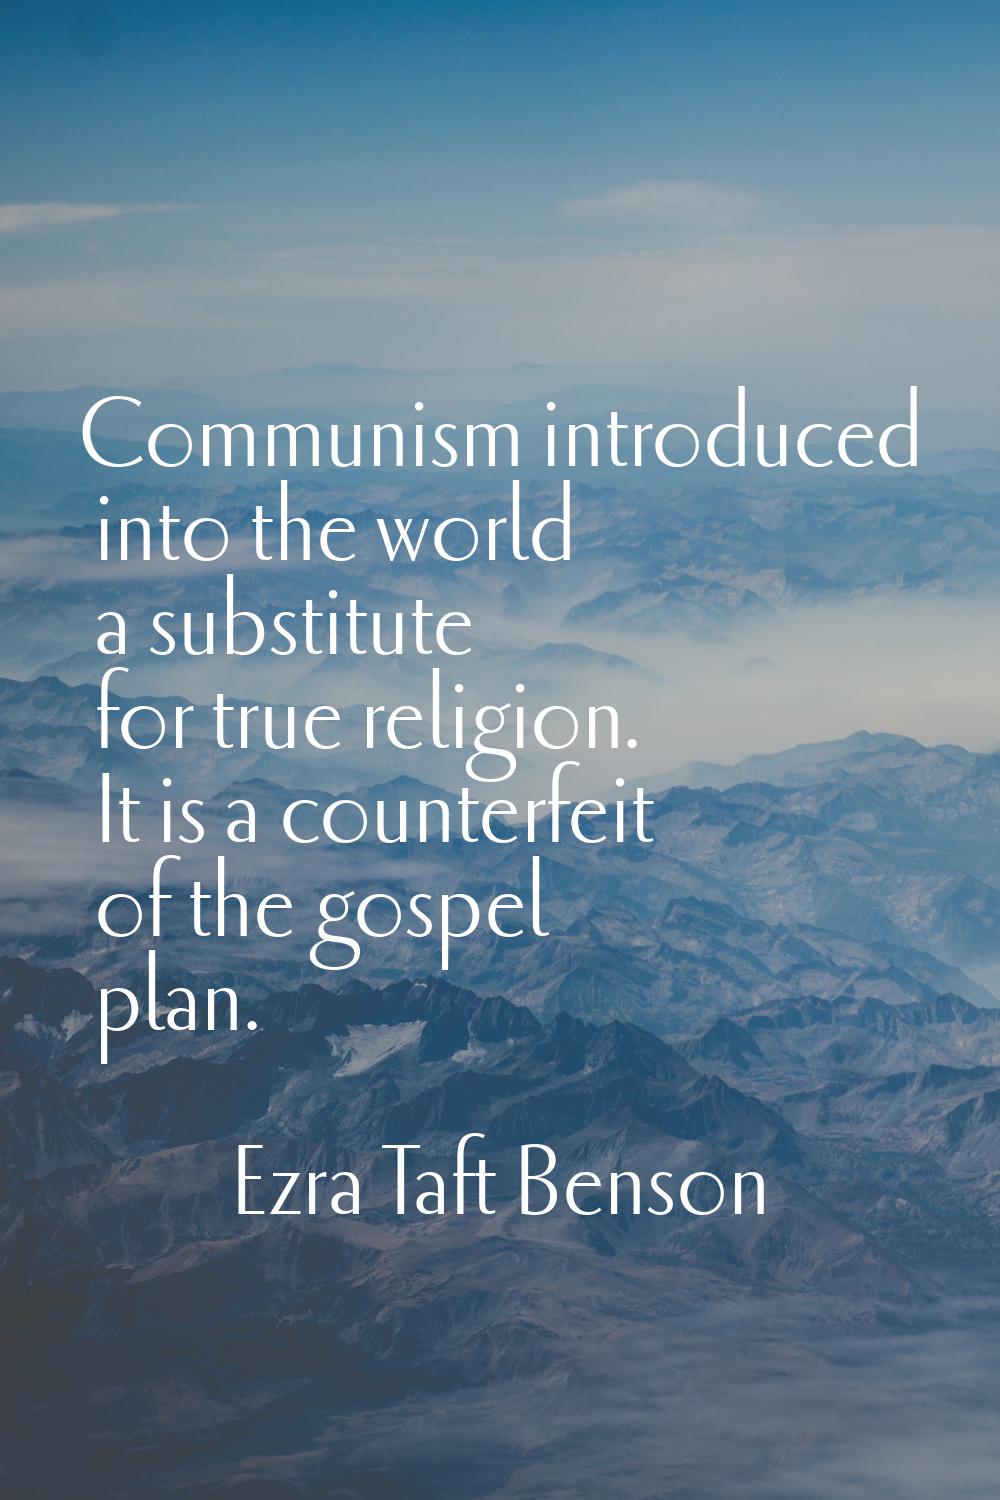 Communism introduced into the world a substitute for true religion. It is a counterfeit of the gosp